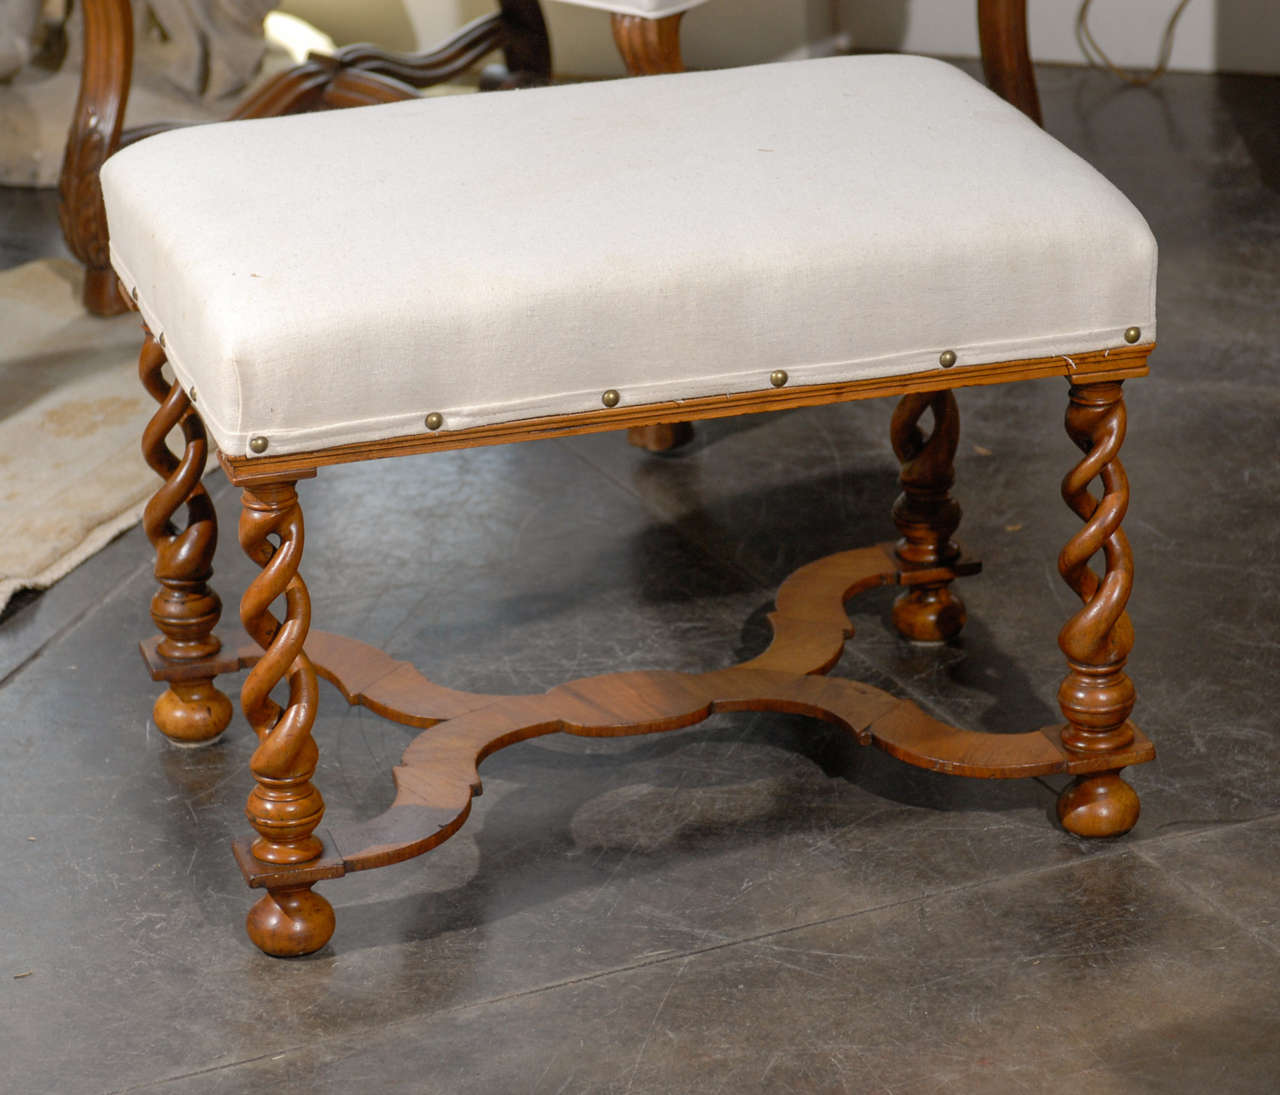 English stool with open Barley twist legs and nice stretcher.